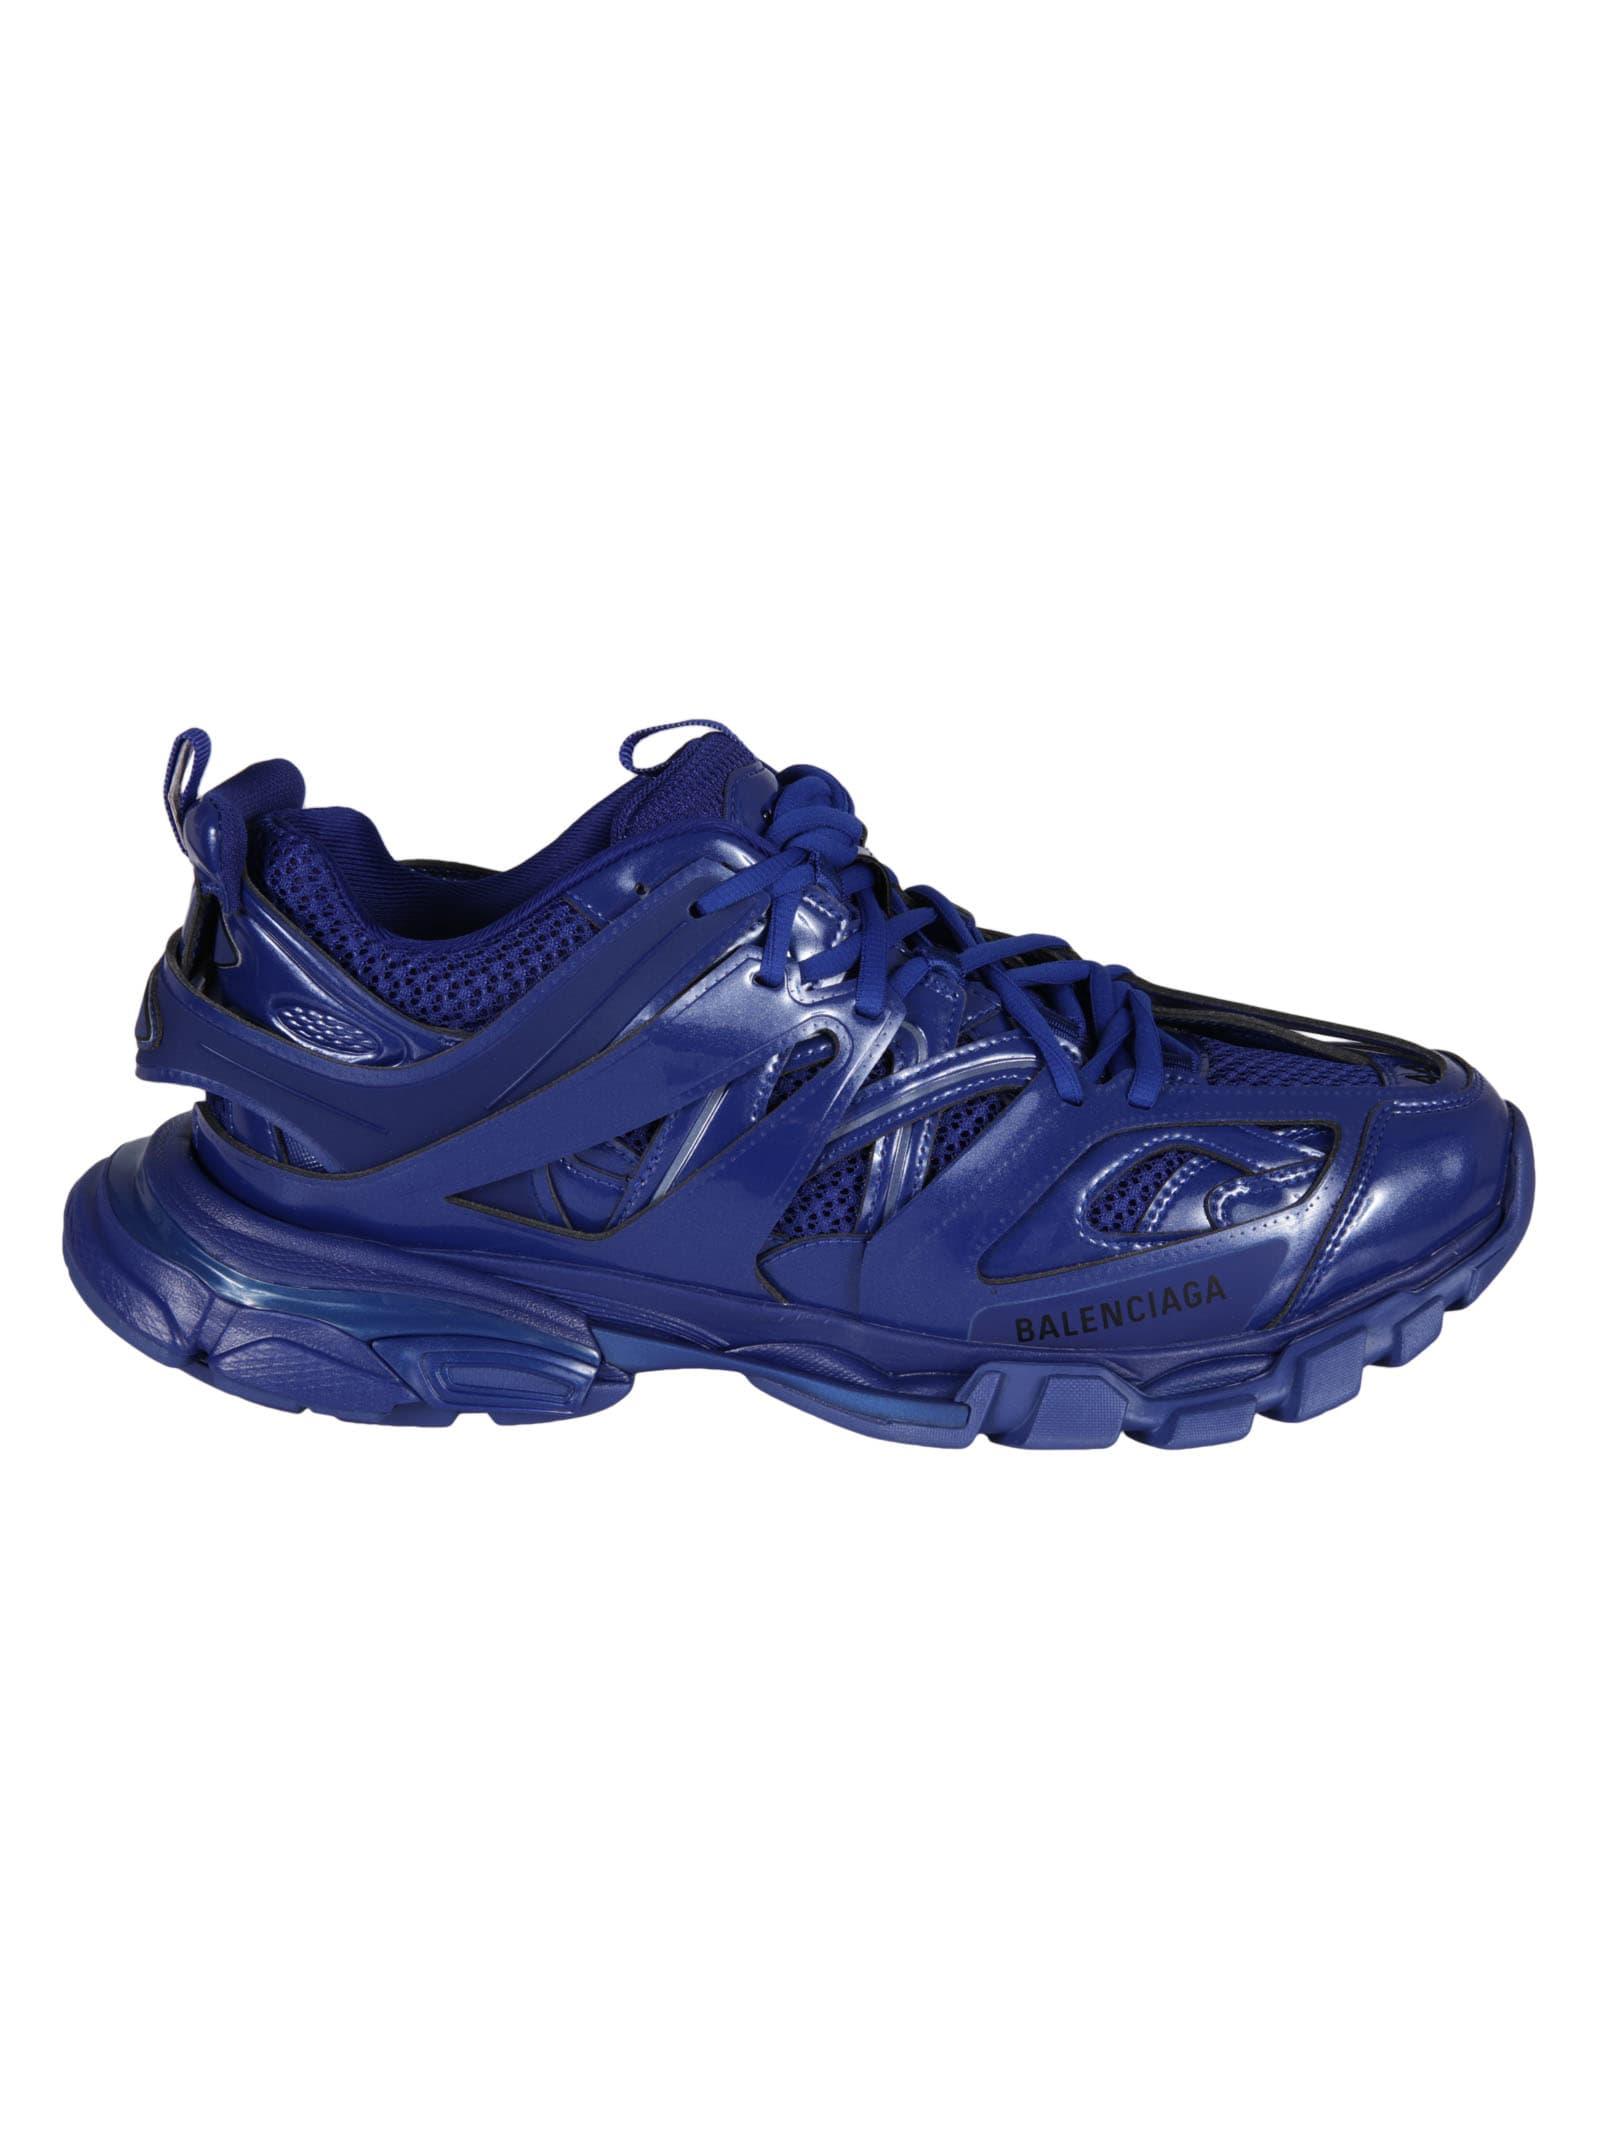 Balenciaga Track Sneakers in Blue Patent (Blue) for Men - Save 49% | Lyst